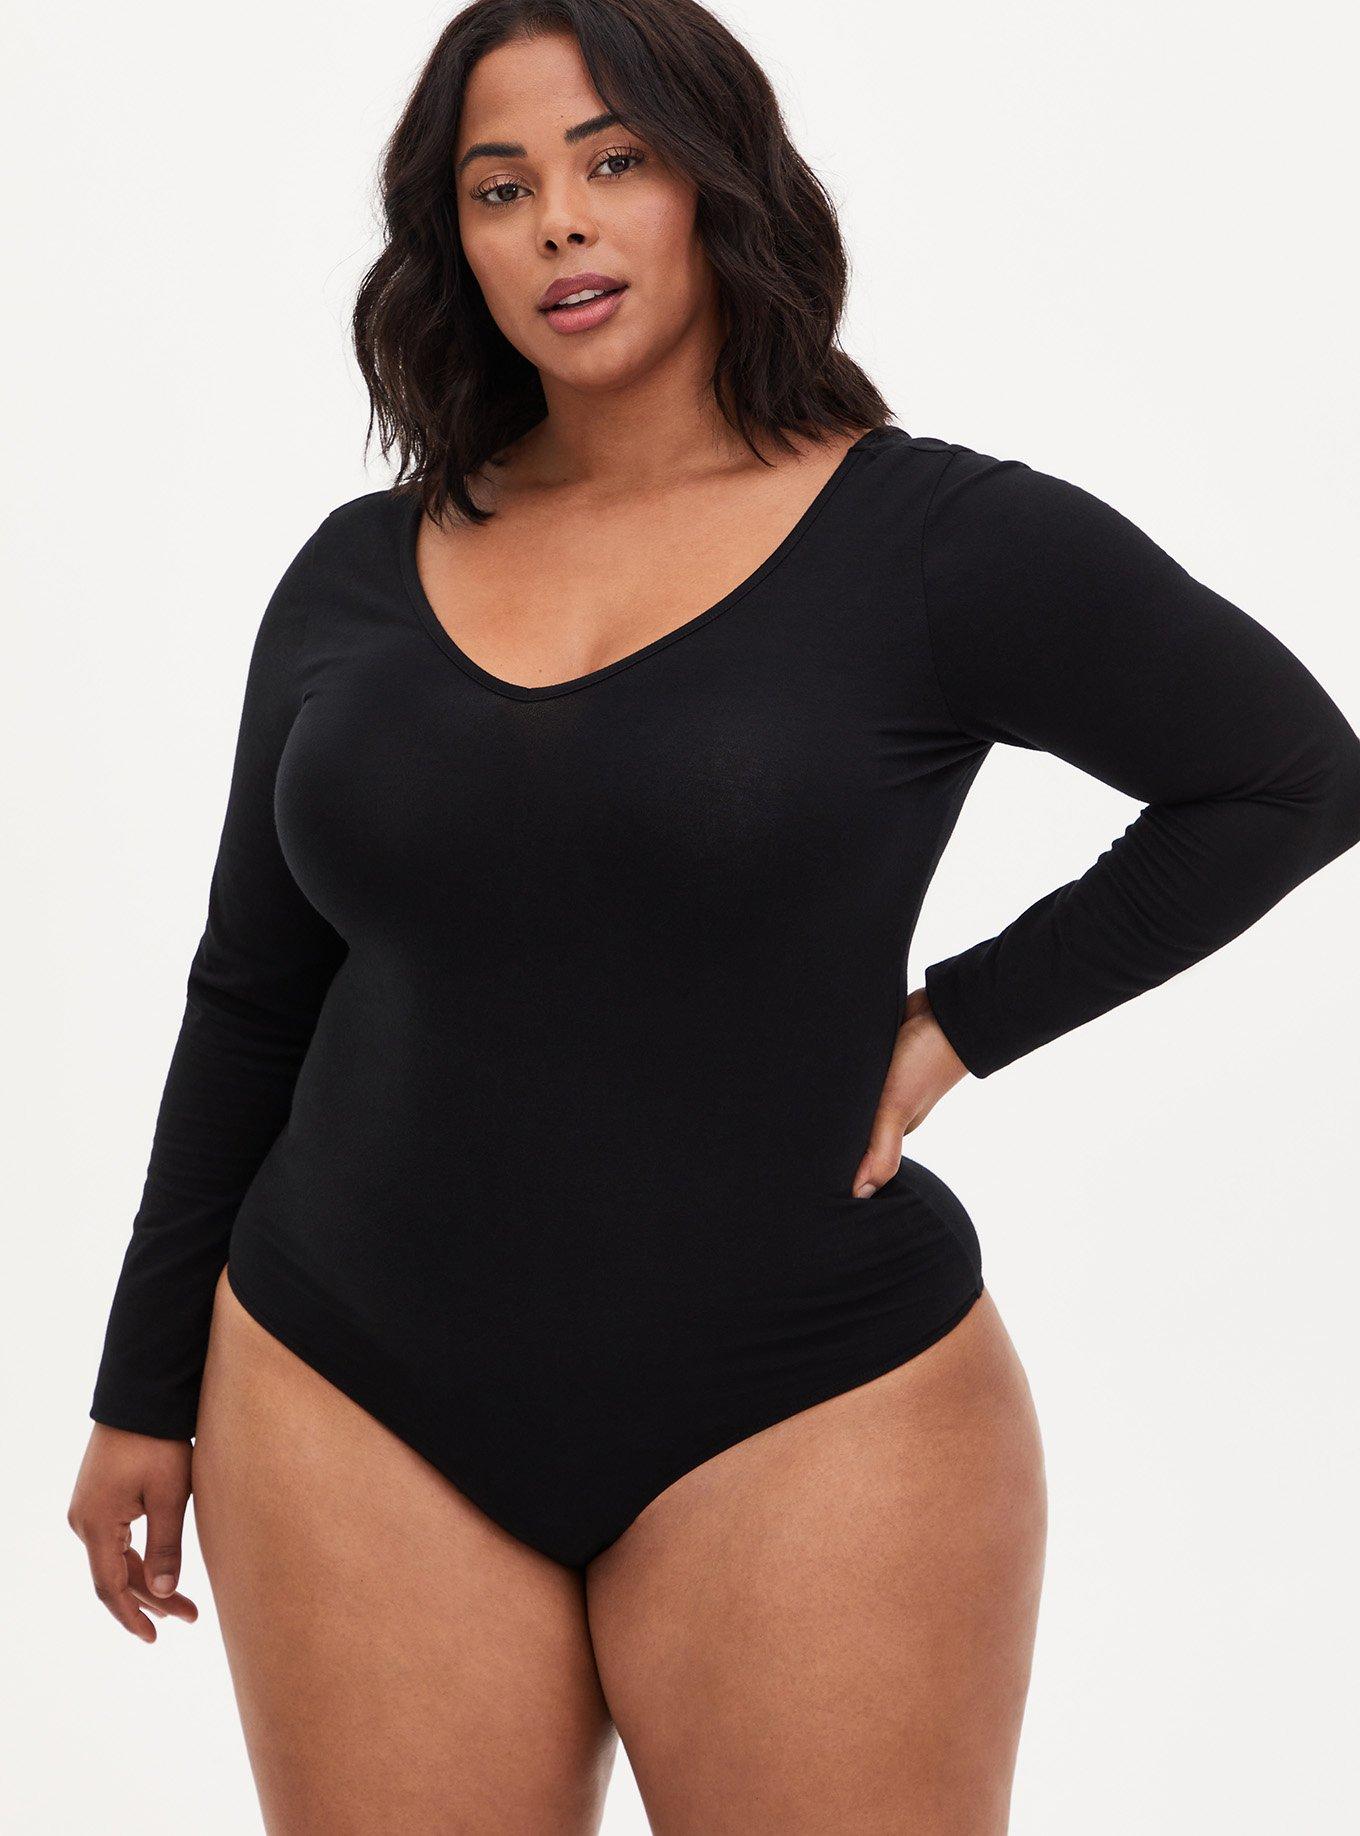 Black Body Suit In Stock🖤🖤🖤 Xl To 4XL🖤🖤🖤 Only Color🖤🖤🖤